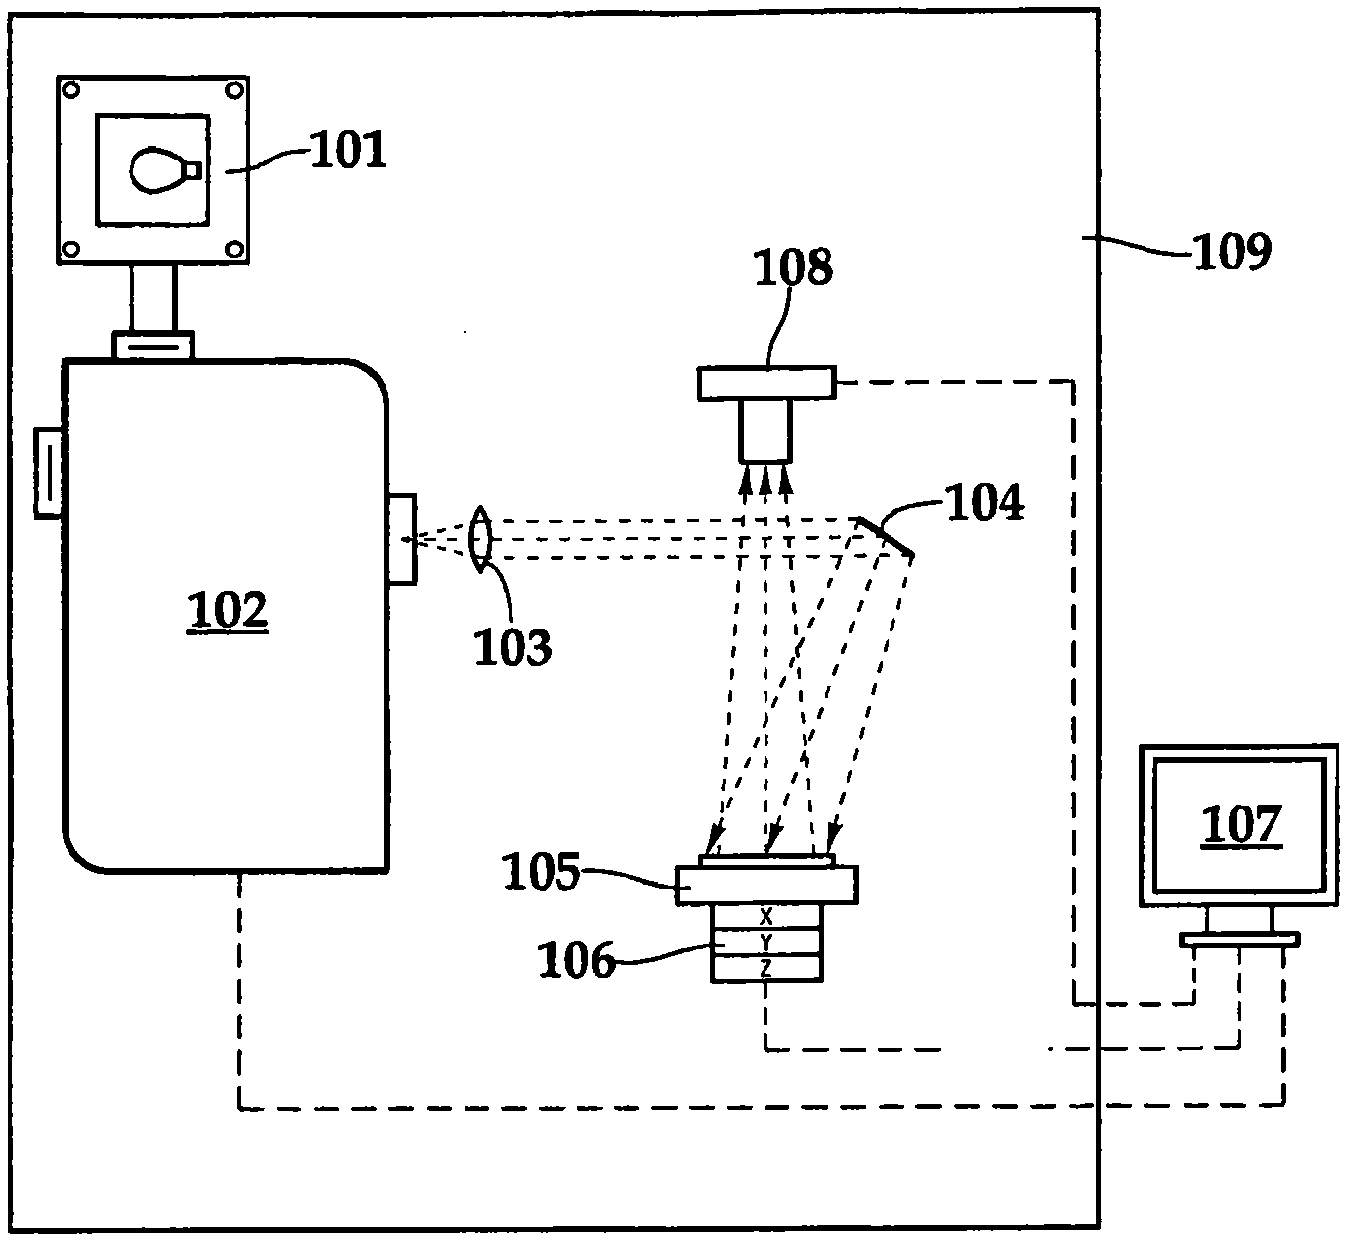 High-throughput spectral imaging and spectroscopy apparatus and methods